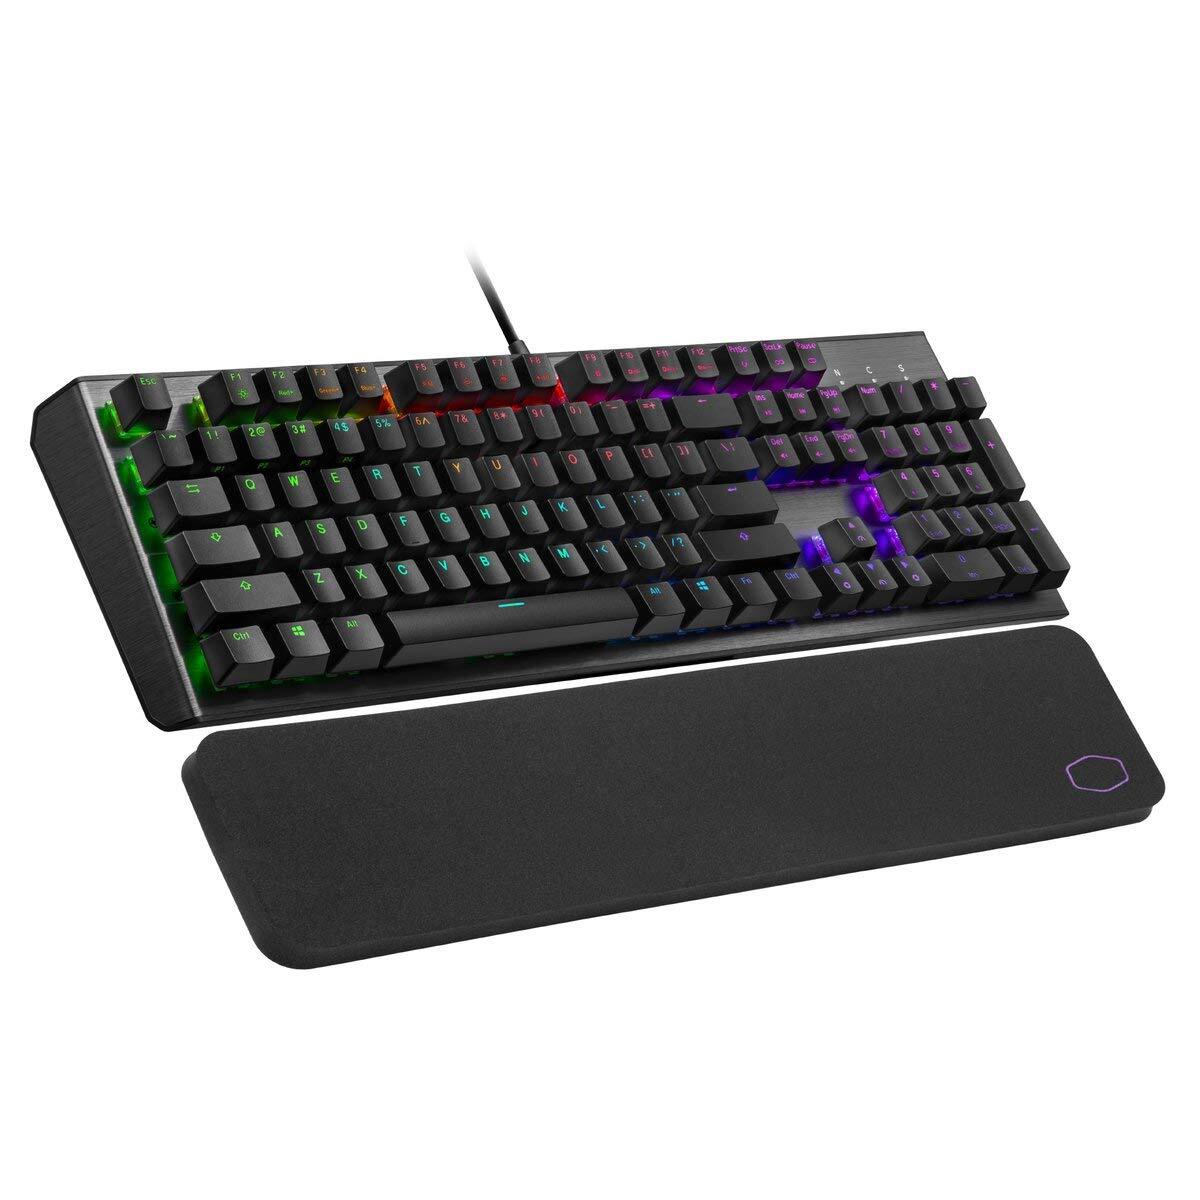 Cooler Master CK550 V2 USB-A Mechanical Keyboard - Full Size | Blue Switch | RGB Lights | Software Control | Aluminum Top Plate | Gaming Keyboard | Wrist Rest Included | Abs Double Injection Keycaps